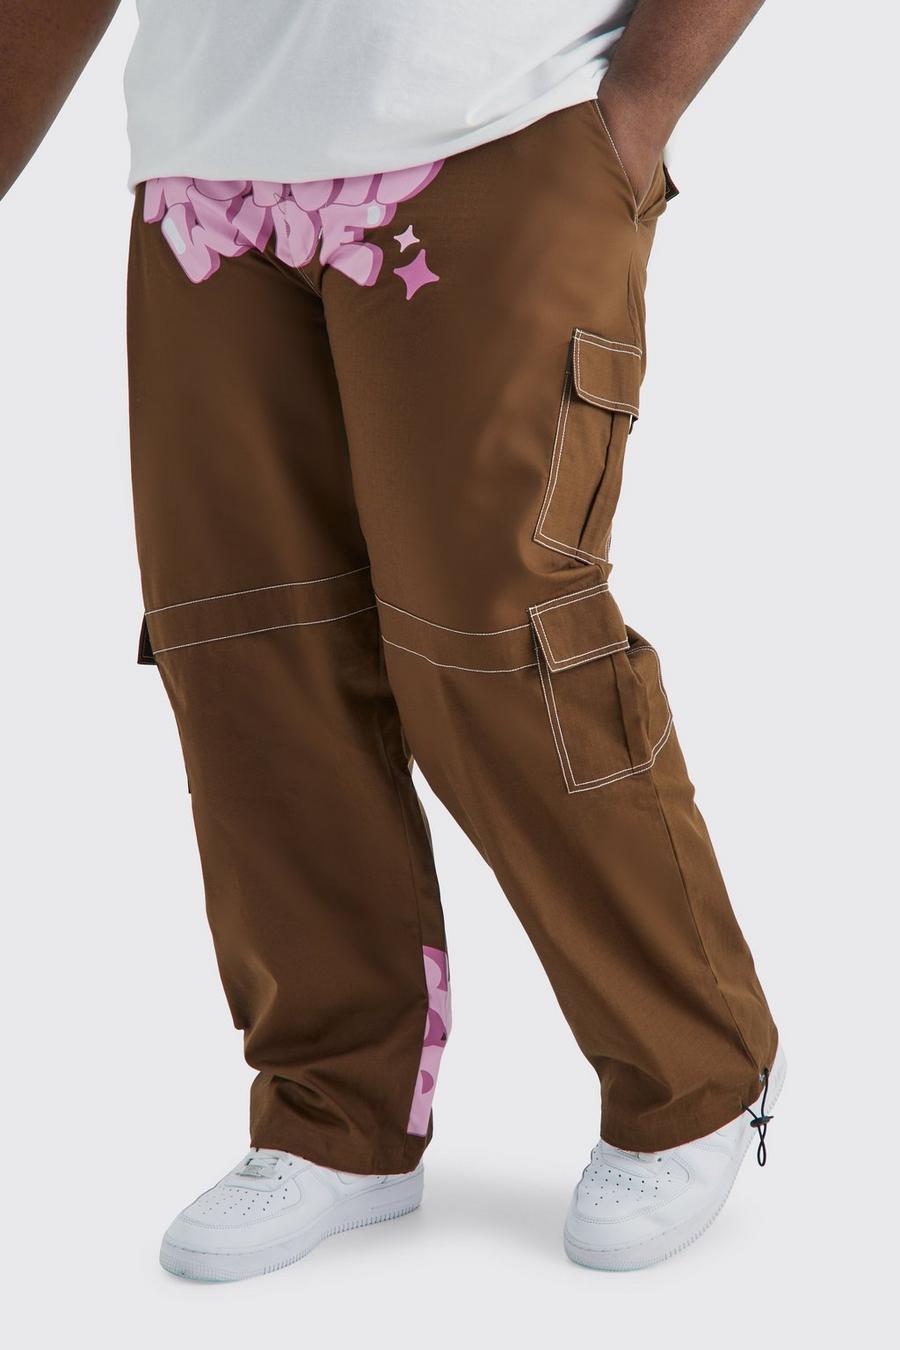 Chocolate Plus Relaxed Ripstop Cargo Graffiti Print Trouser